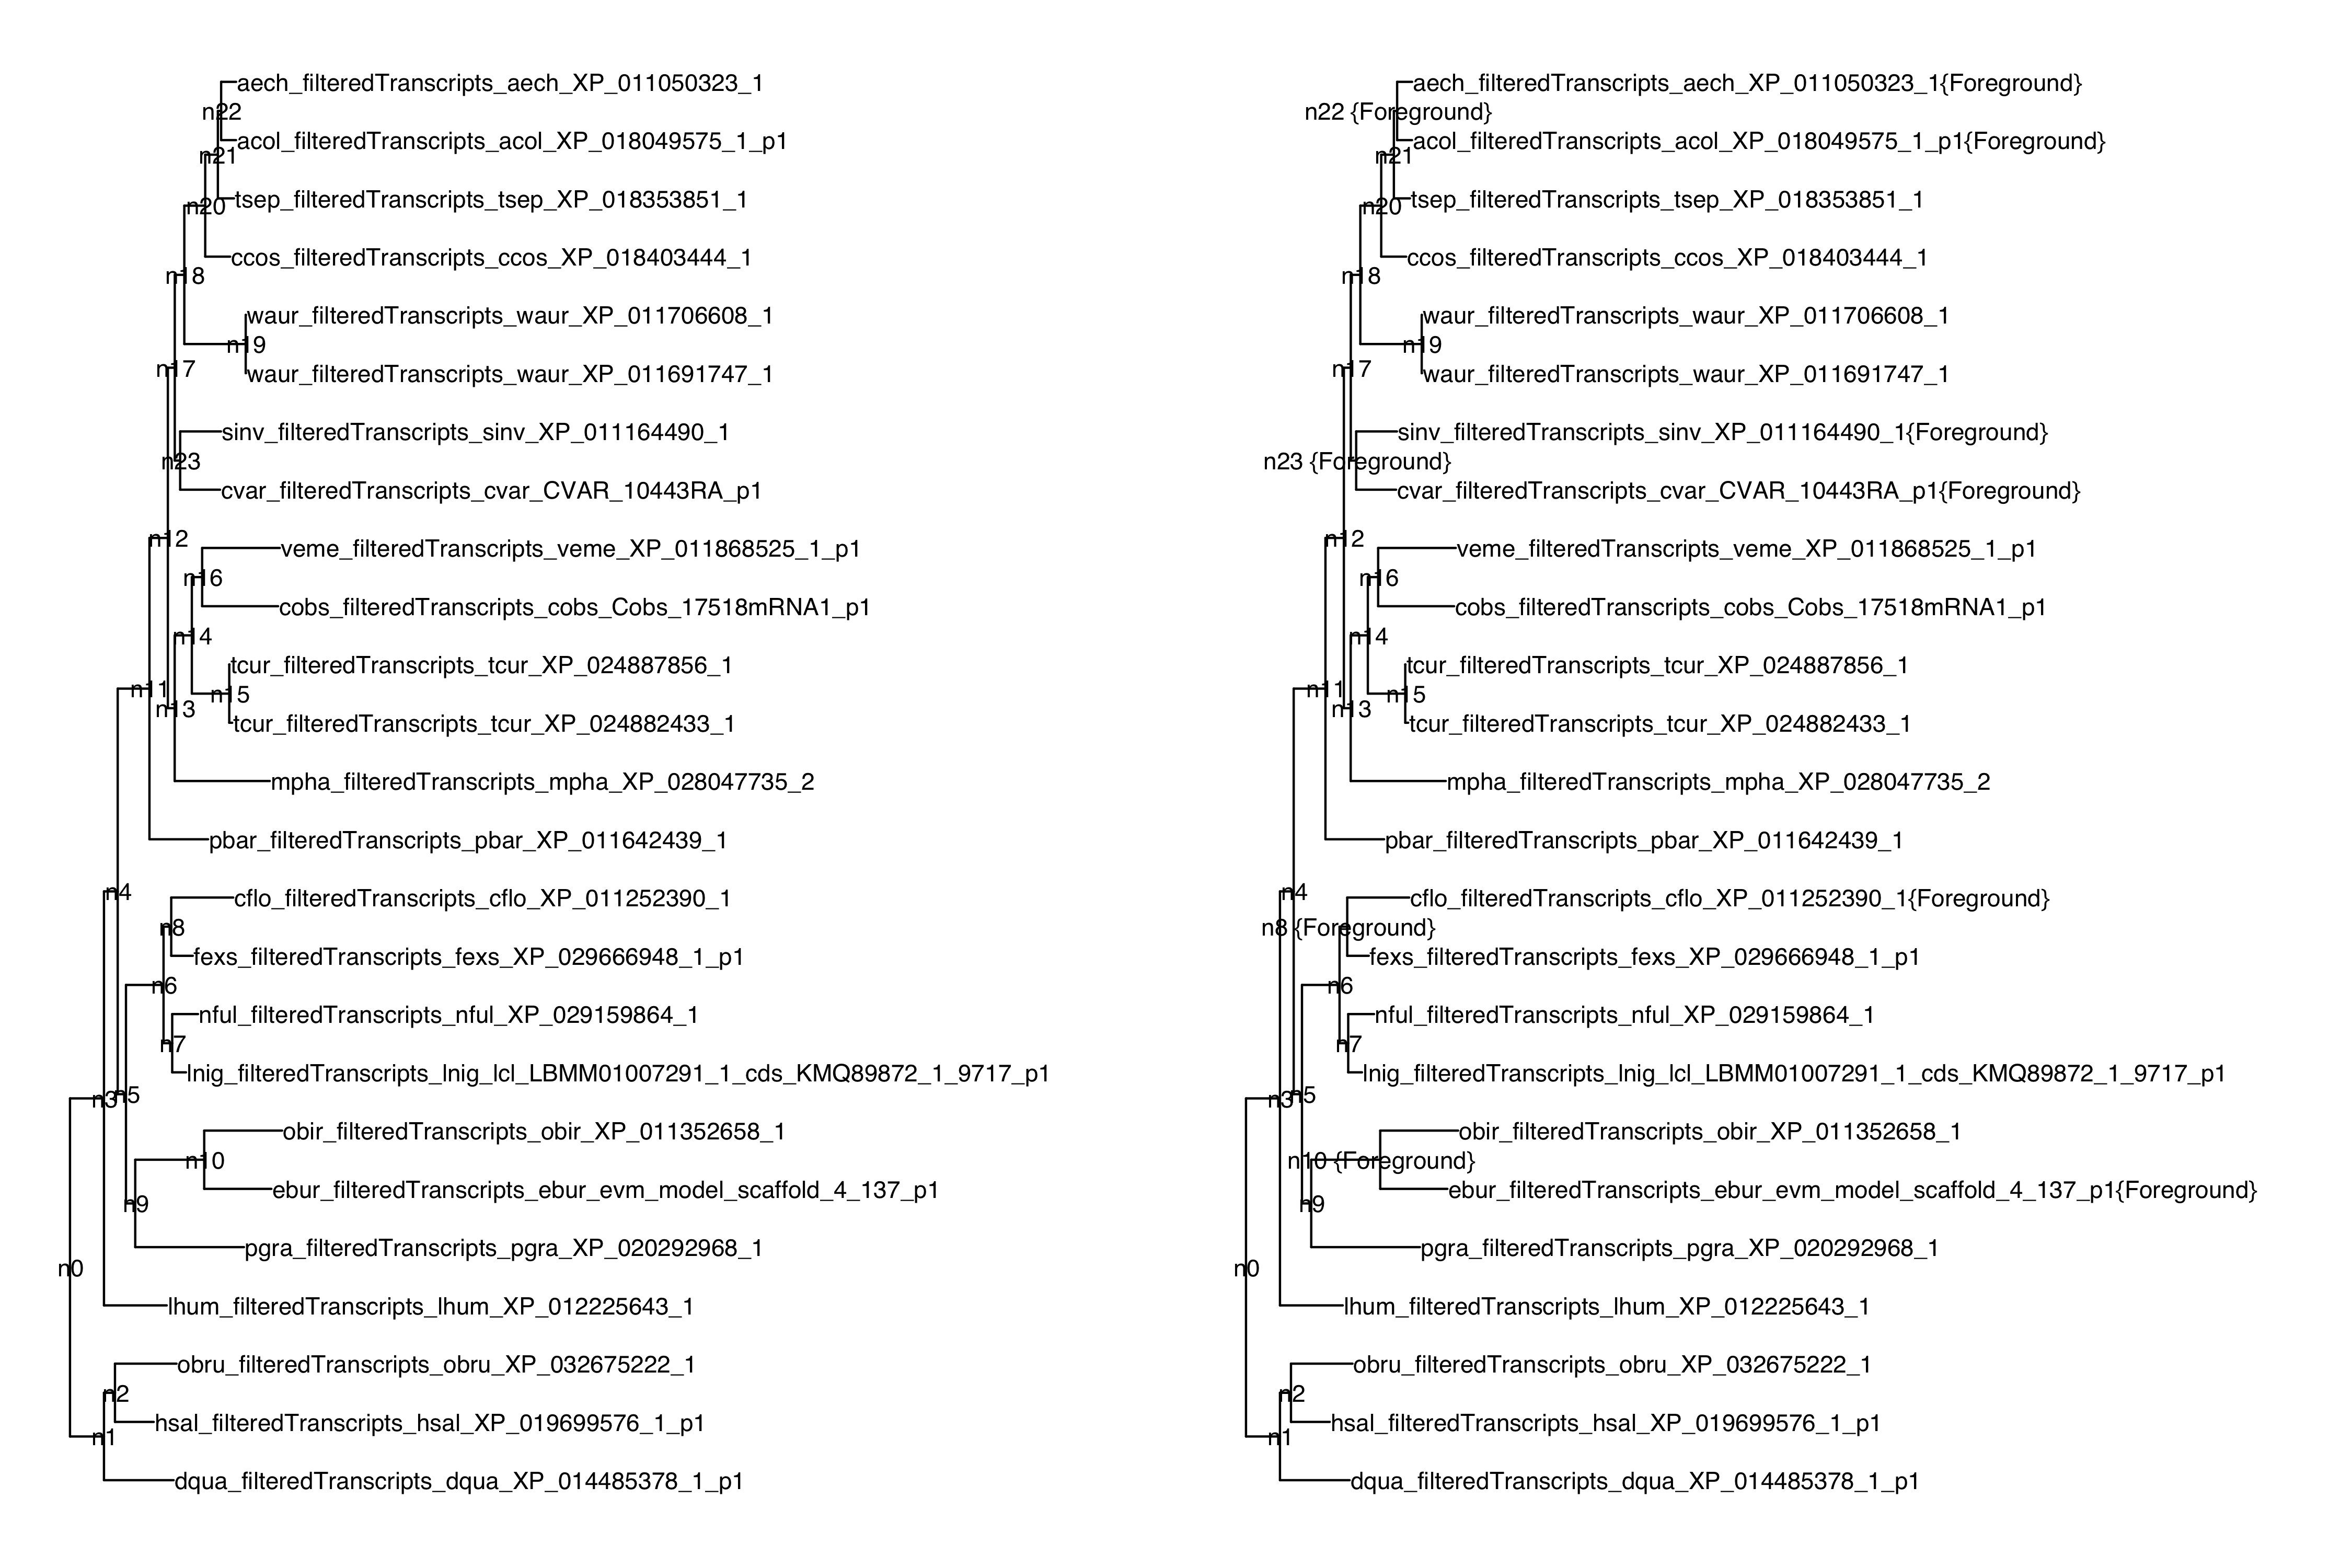 side-by-side labelled and unlabelled phylogeny